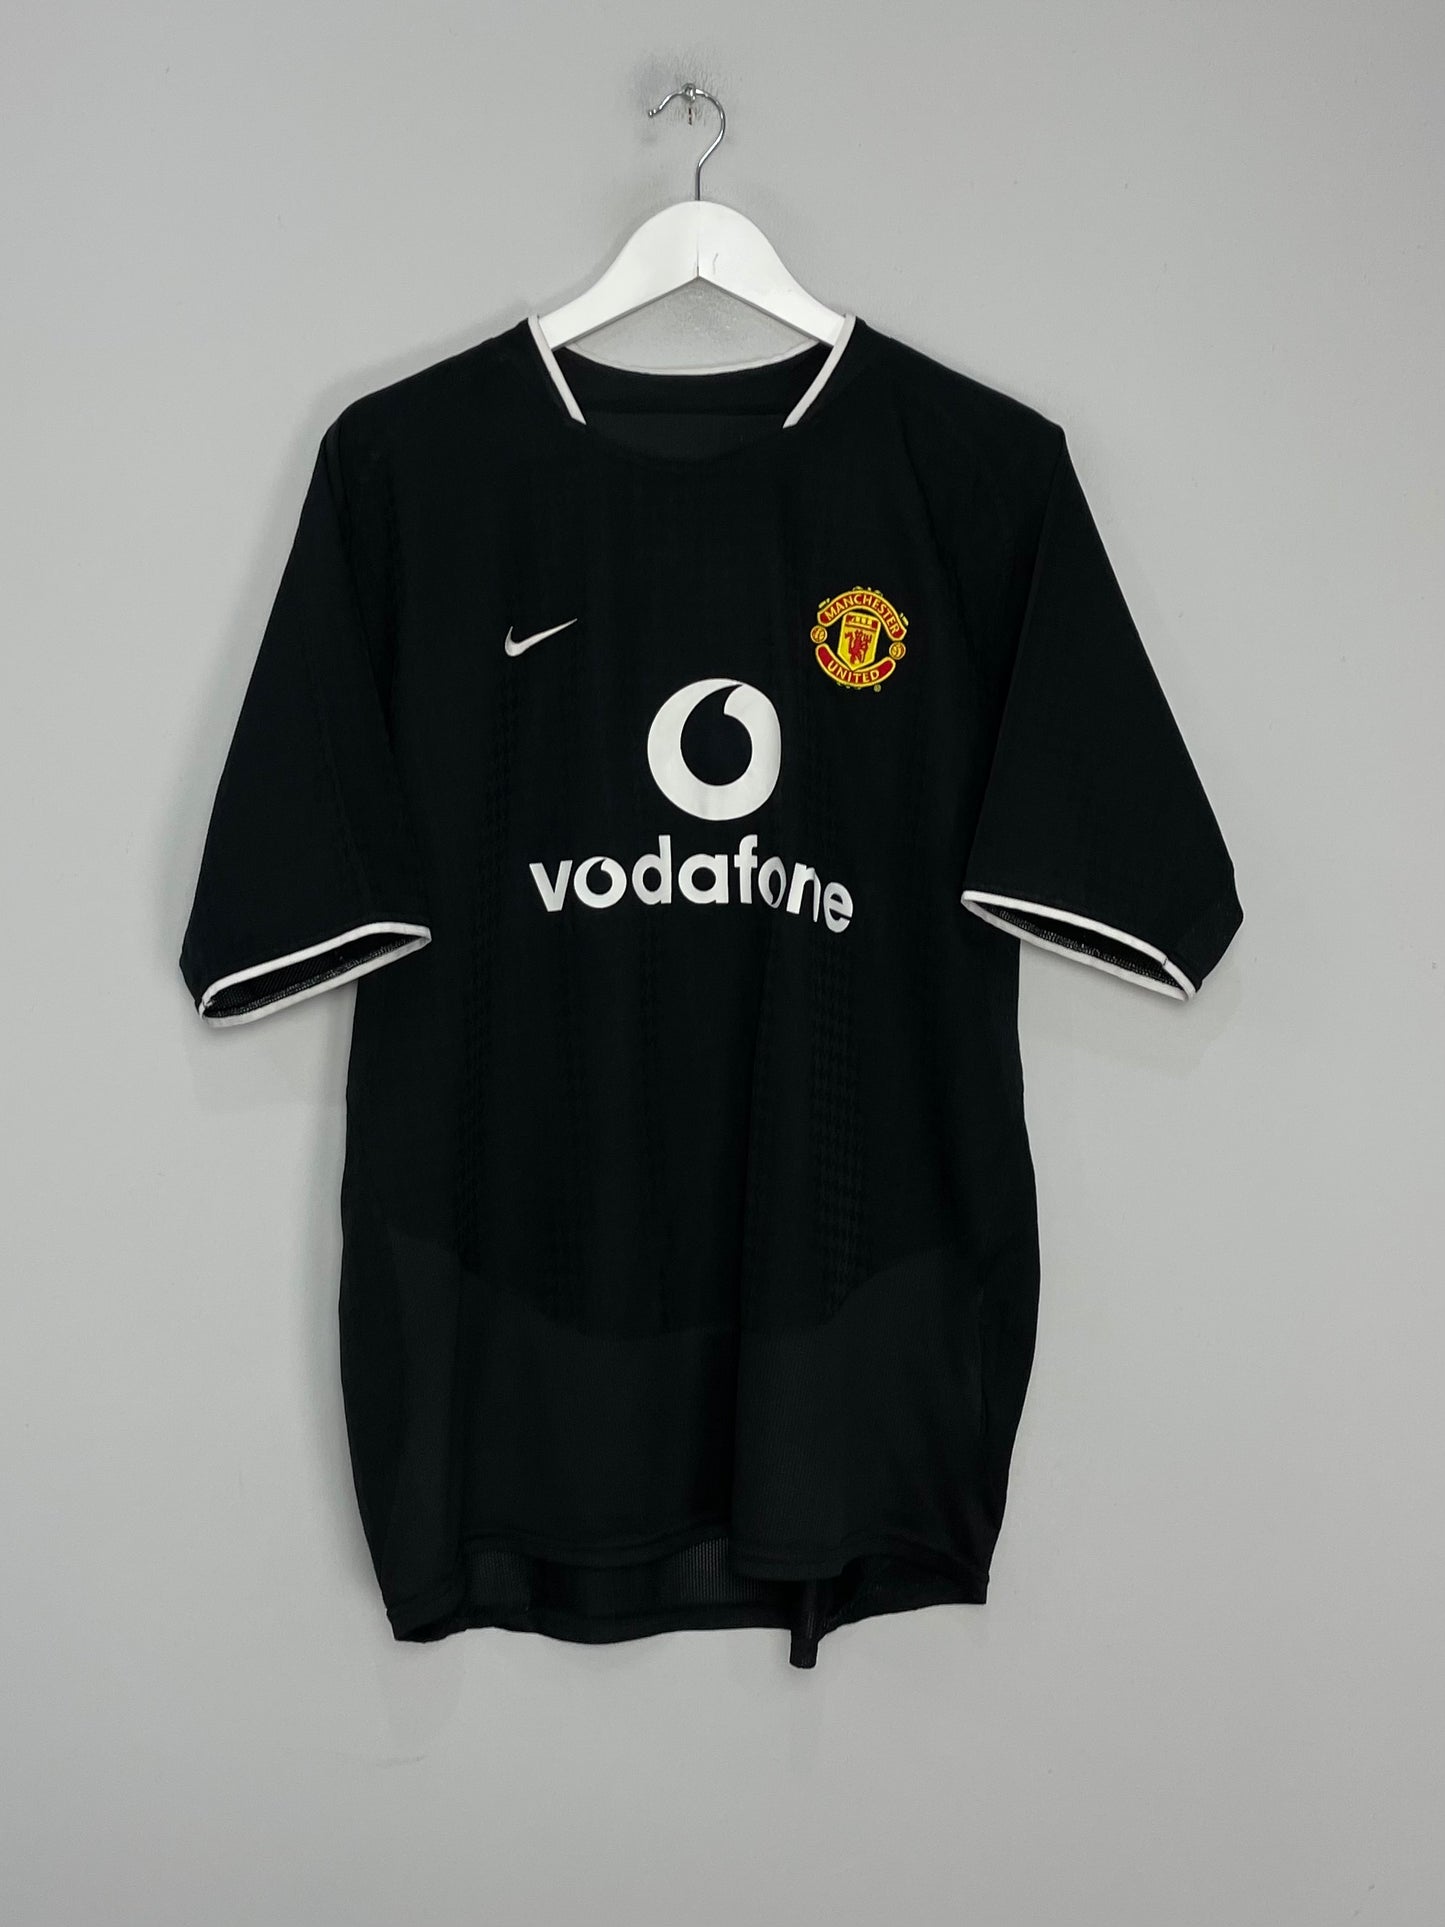 2003/05 MANCHESTER UNITED ROONEY #8 AWAY SHIRT (L) NIKE